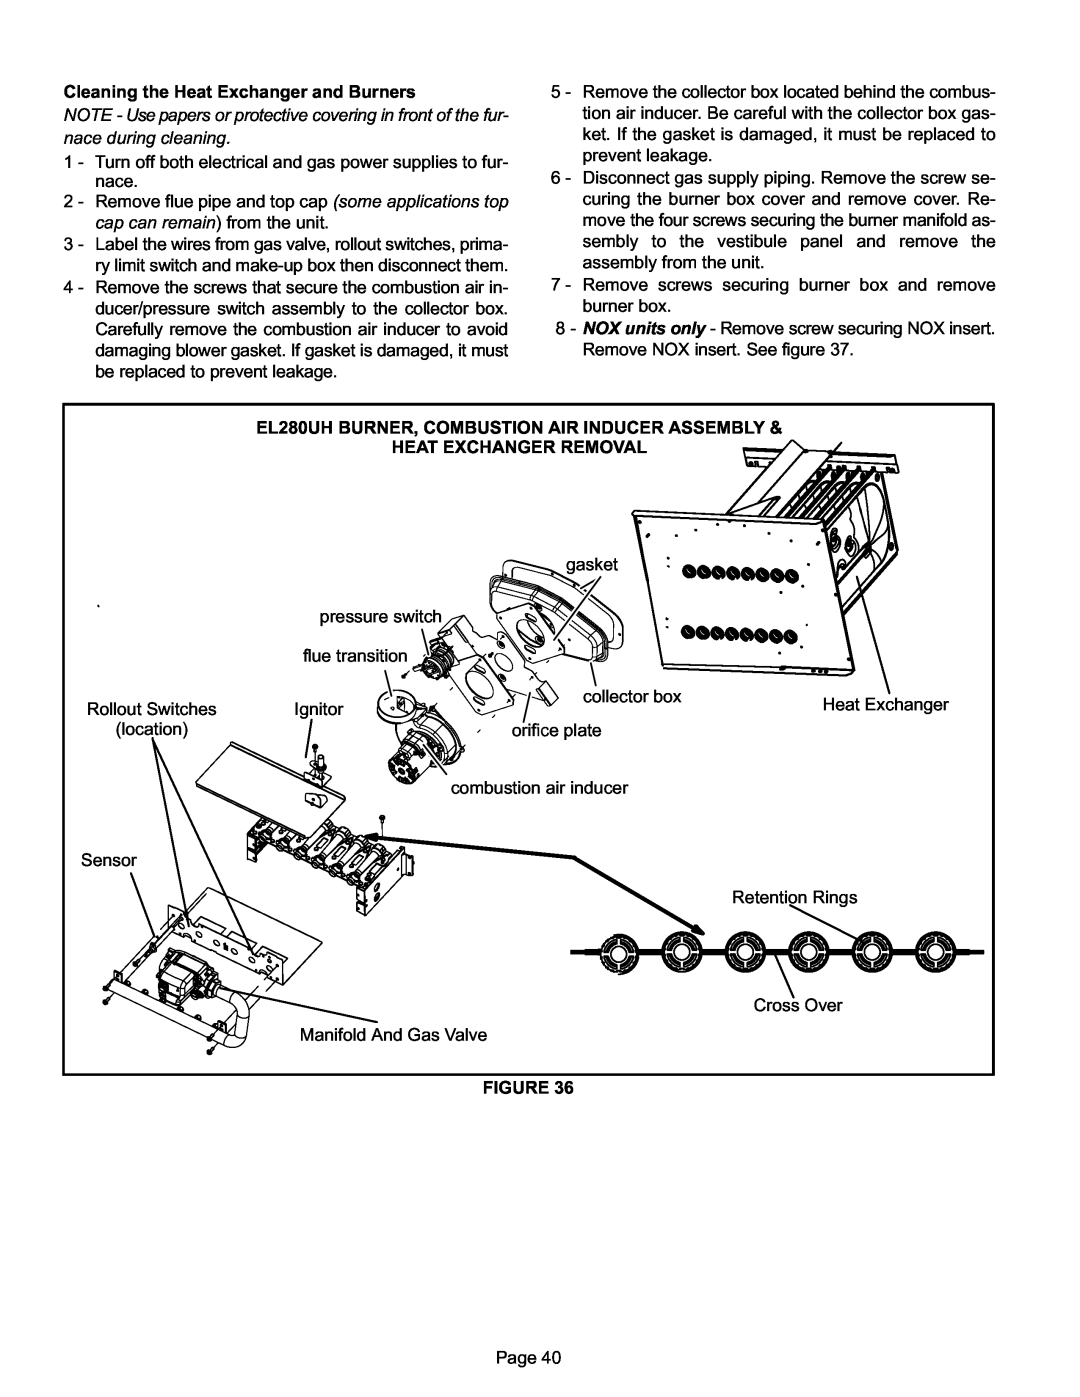 Lennox International Inc EL280UH installation instructions Cleaning the Heat Exchanger and Burners 